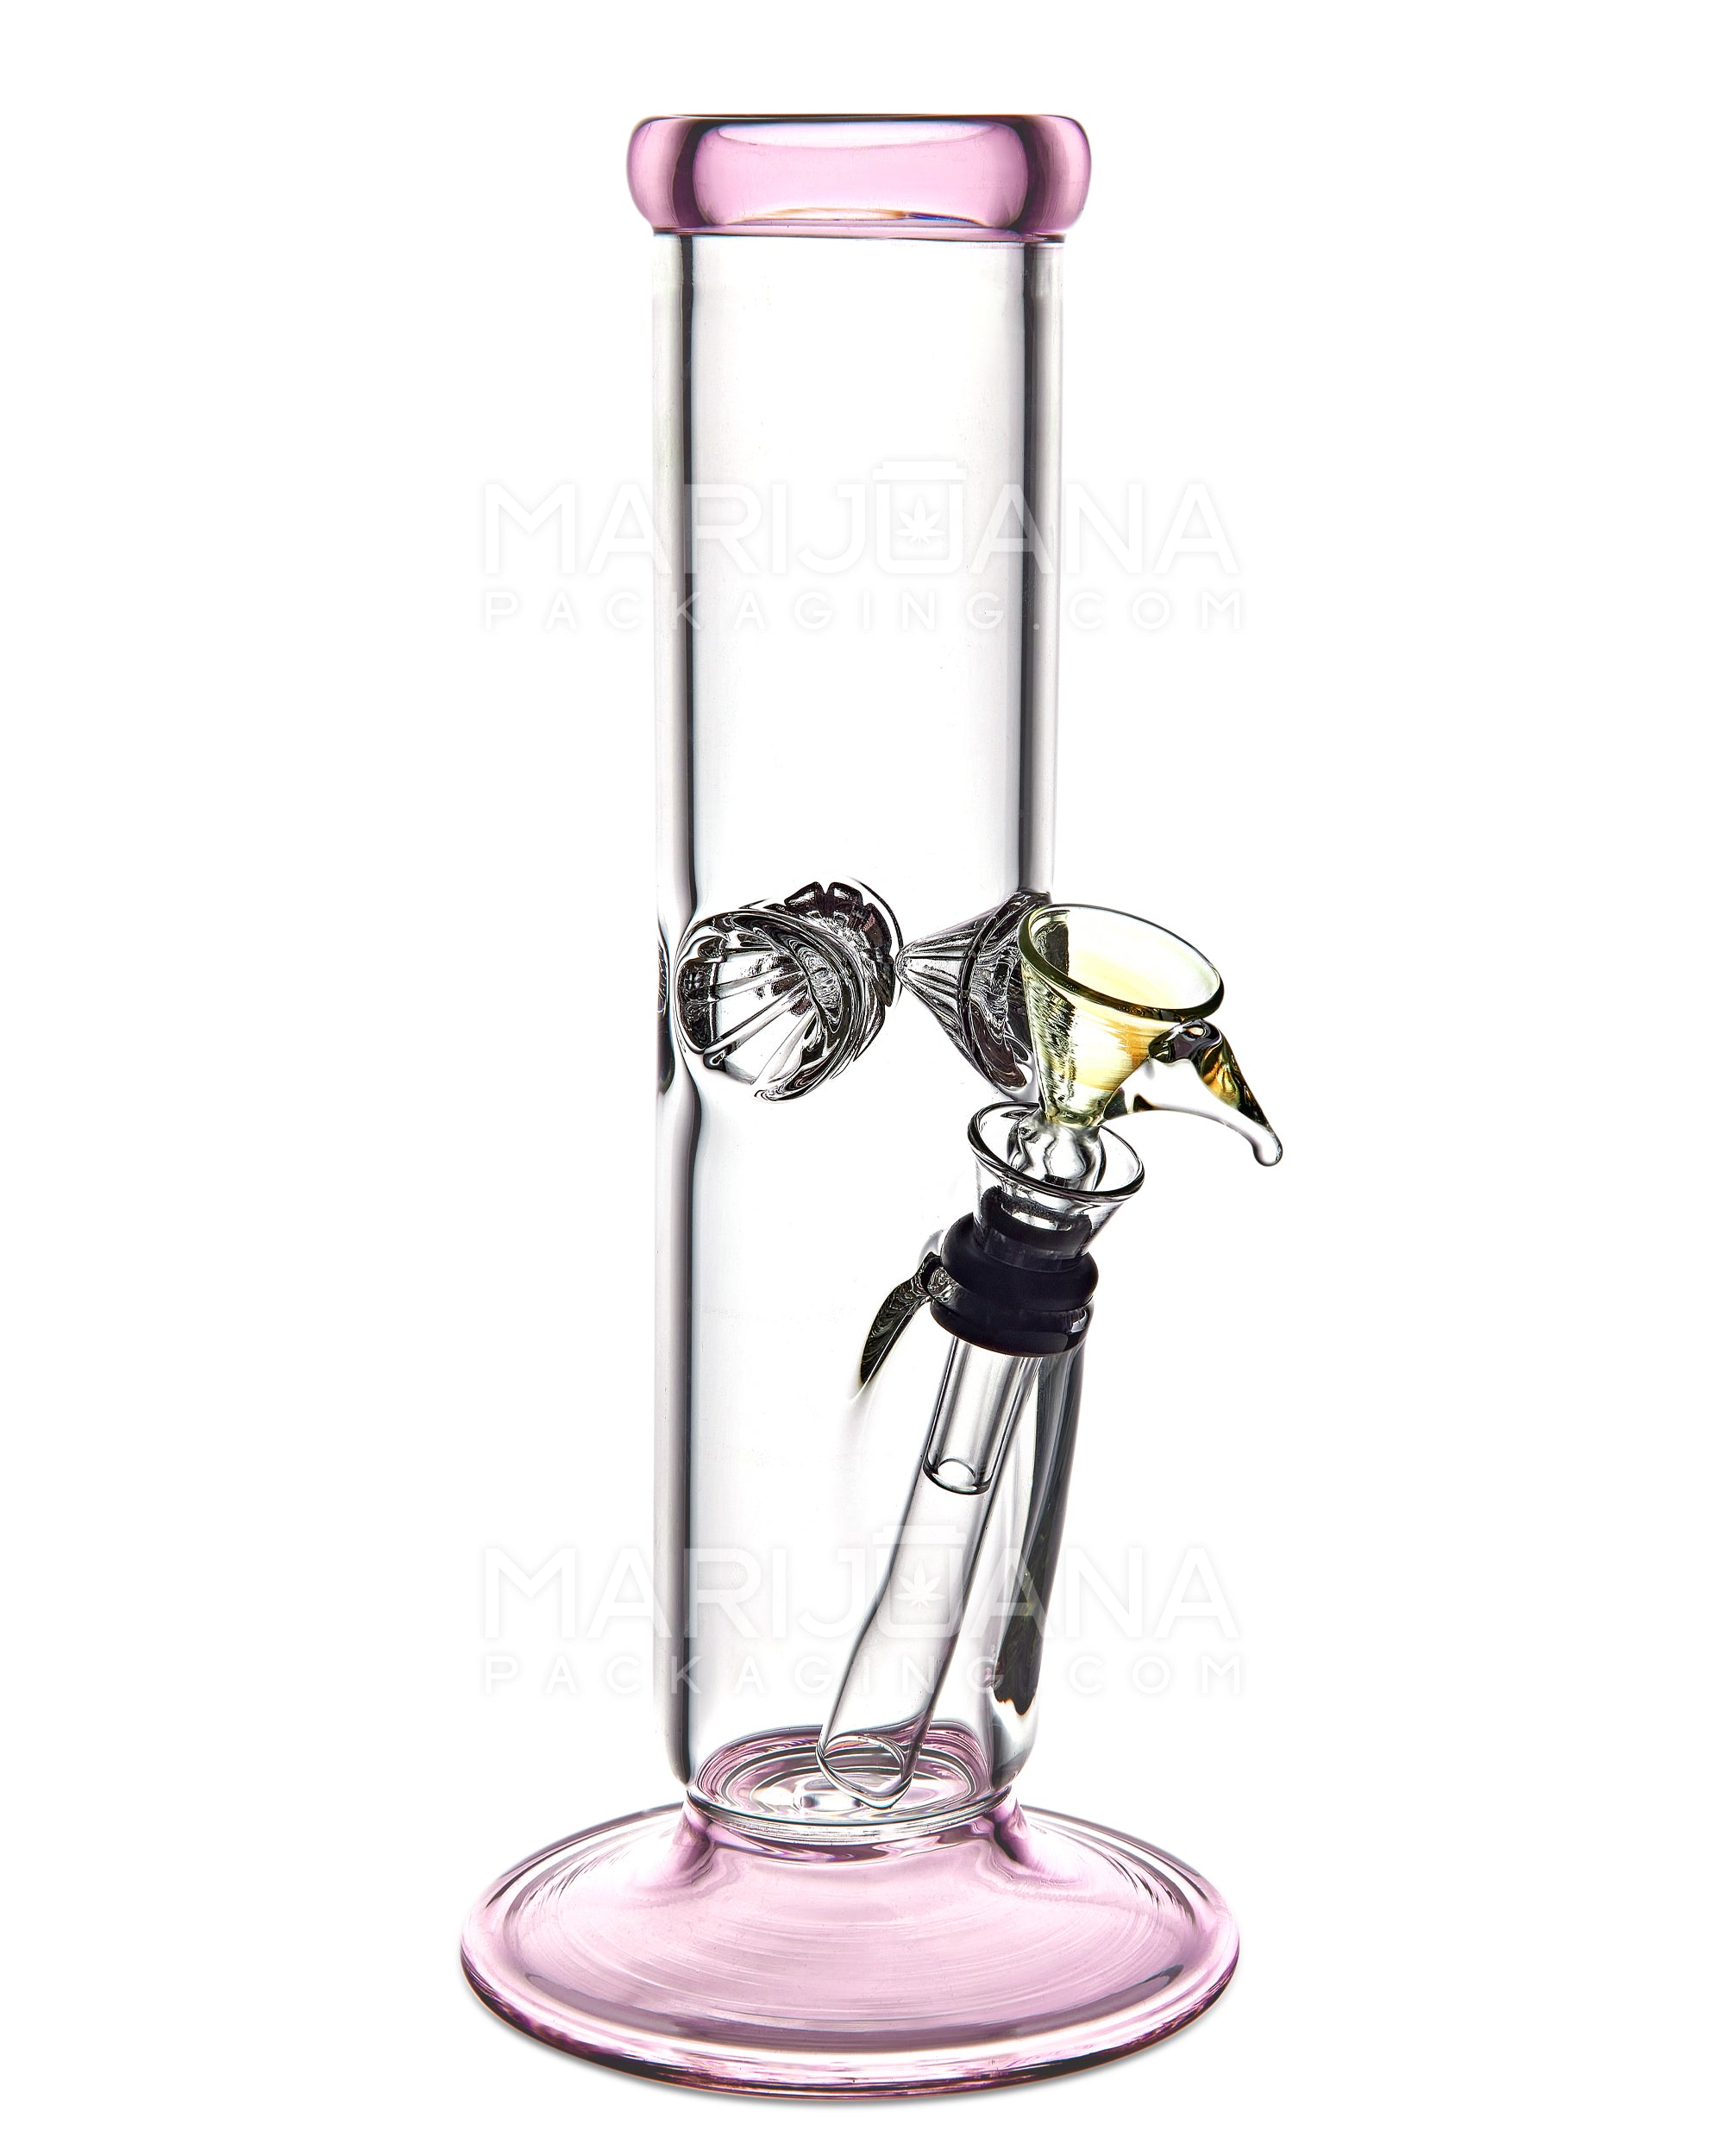 USA Glass | Straight Glass Water Pipe w/ Ice Catcher | 9in Tall - Grommet Bowl - Pink - 4